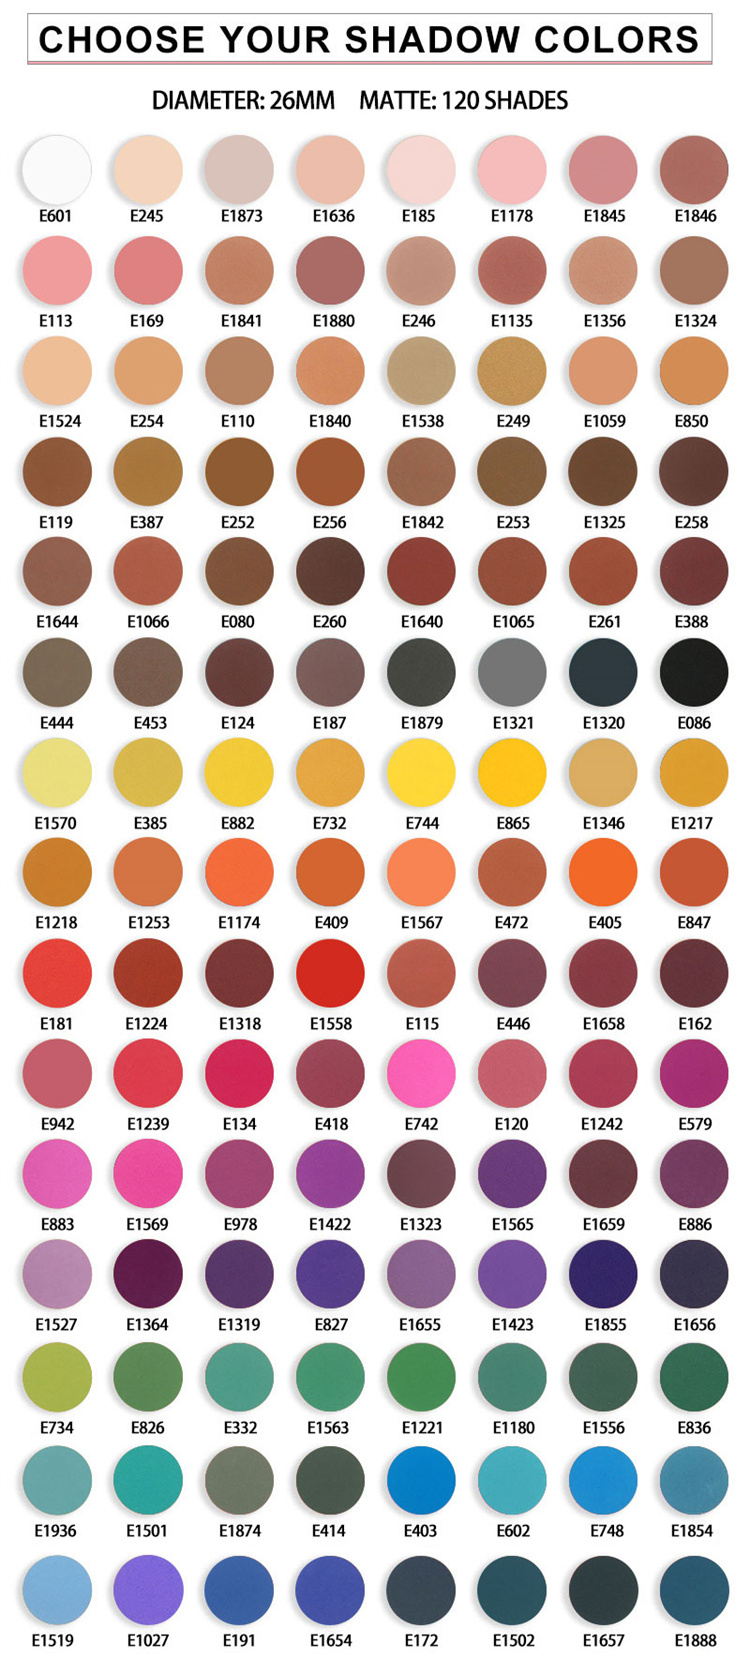 Choose your shadow colors